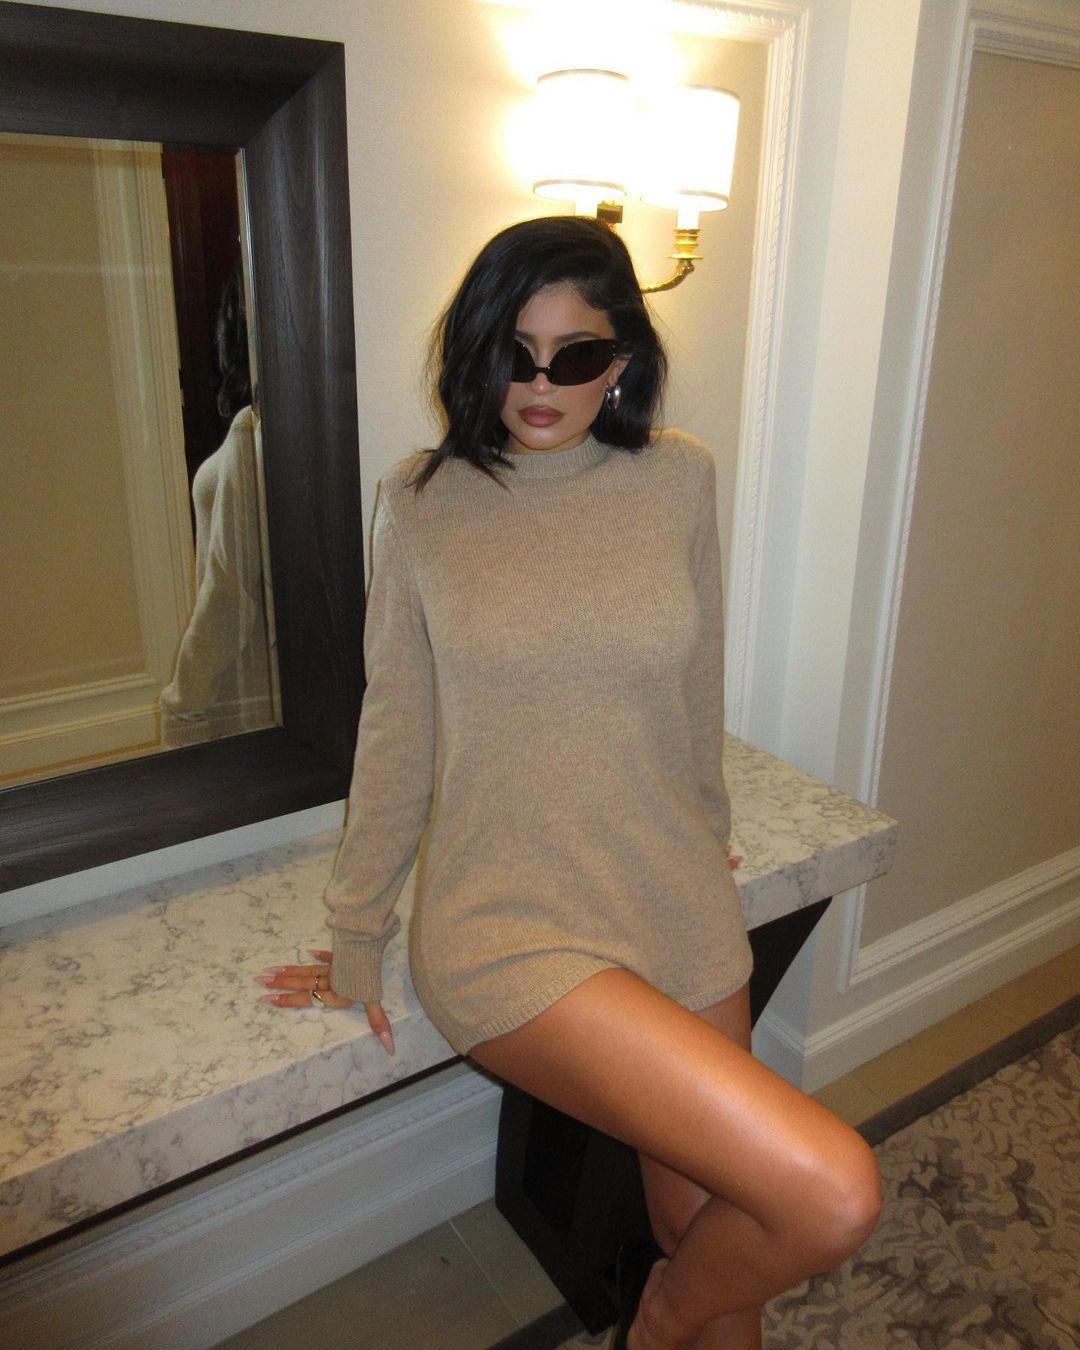 Kylie Jenner shows off bare legs in mini dress & leather jacket after she shares secret never-before-seen photos